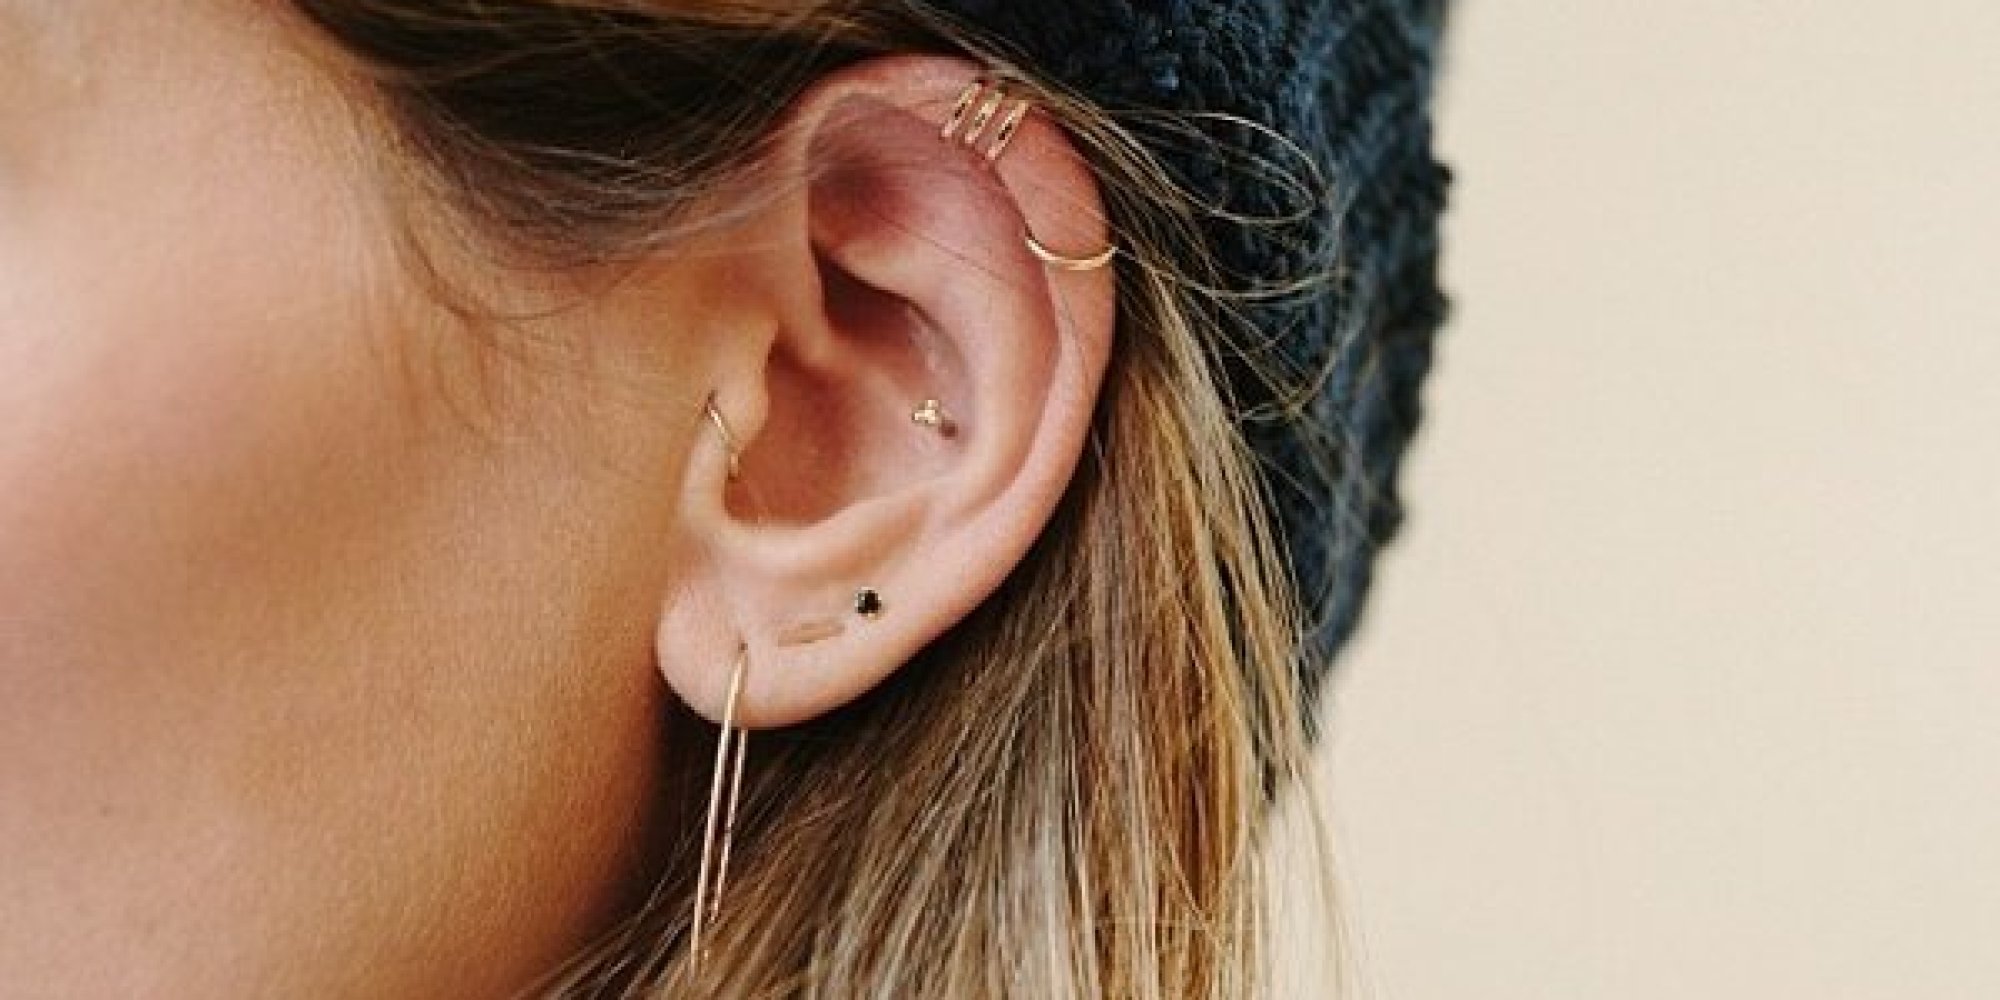 Thinking About Getting Another Ear Piercing? You Should Read This First